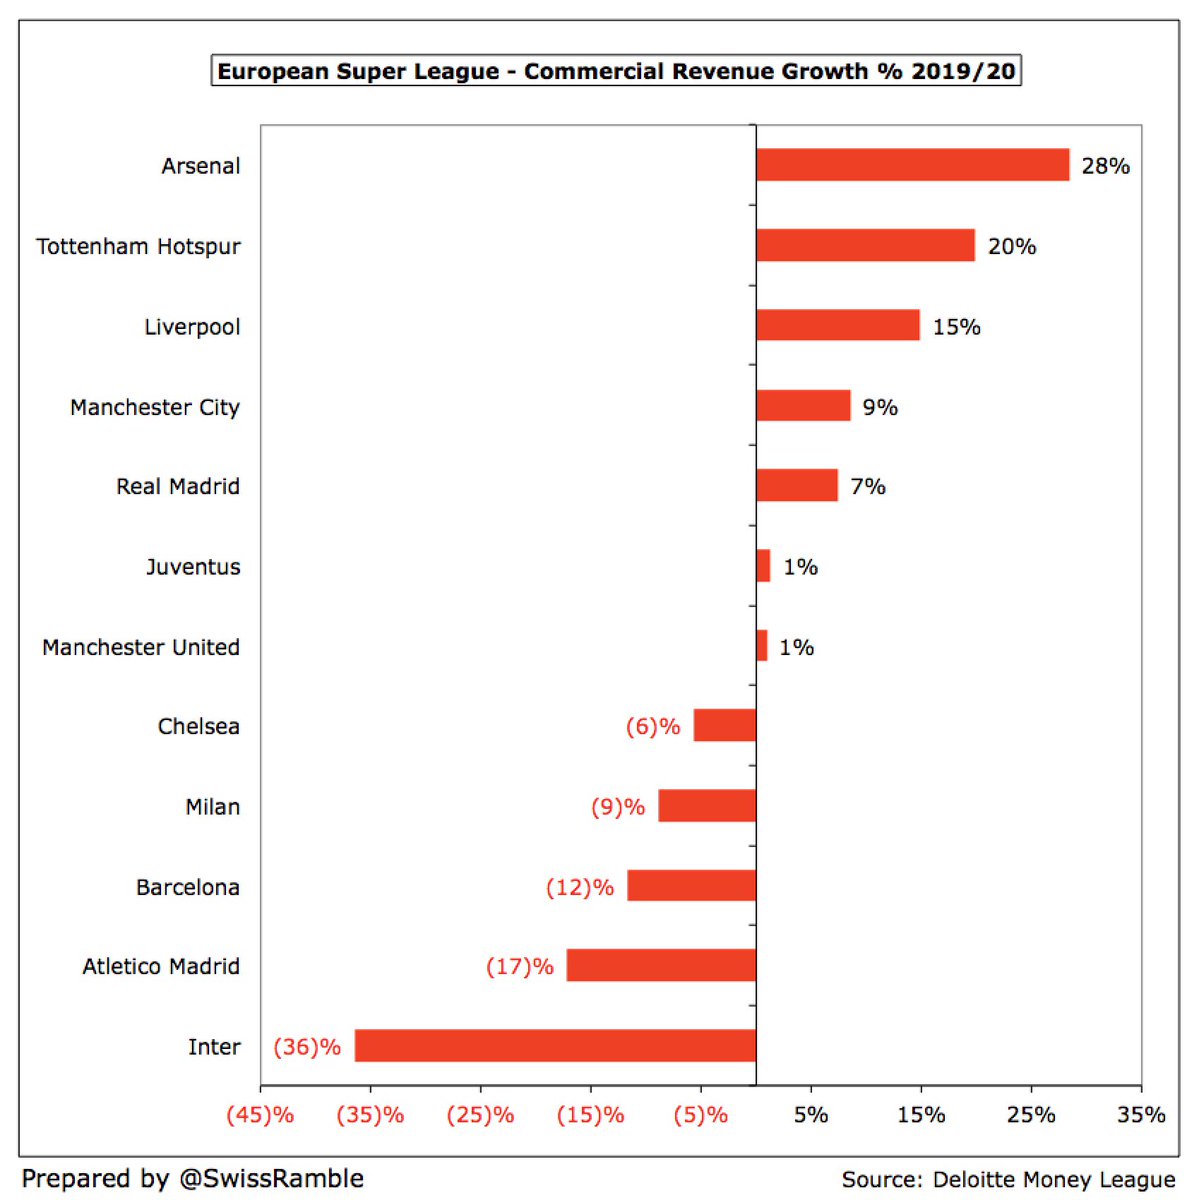 In fact, commercial income held up pretty well in the pandemic with many clubs actually increasing revenue in 2019/20, especially in England  #AFC £31m,  #LFC £28m and  #THFC £27m, mainly due to new sponsorship deals, though new stadium also helped Spurs.